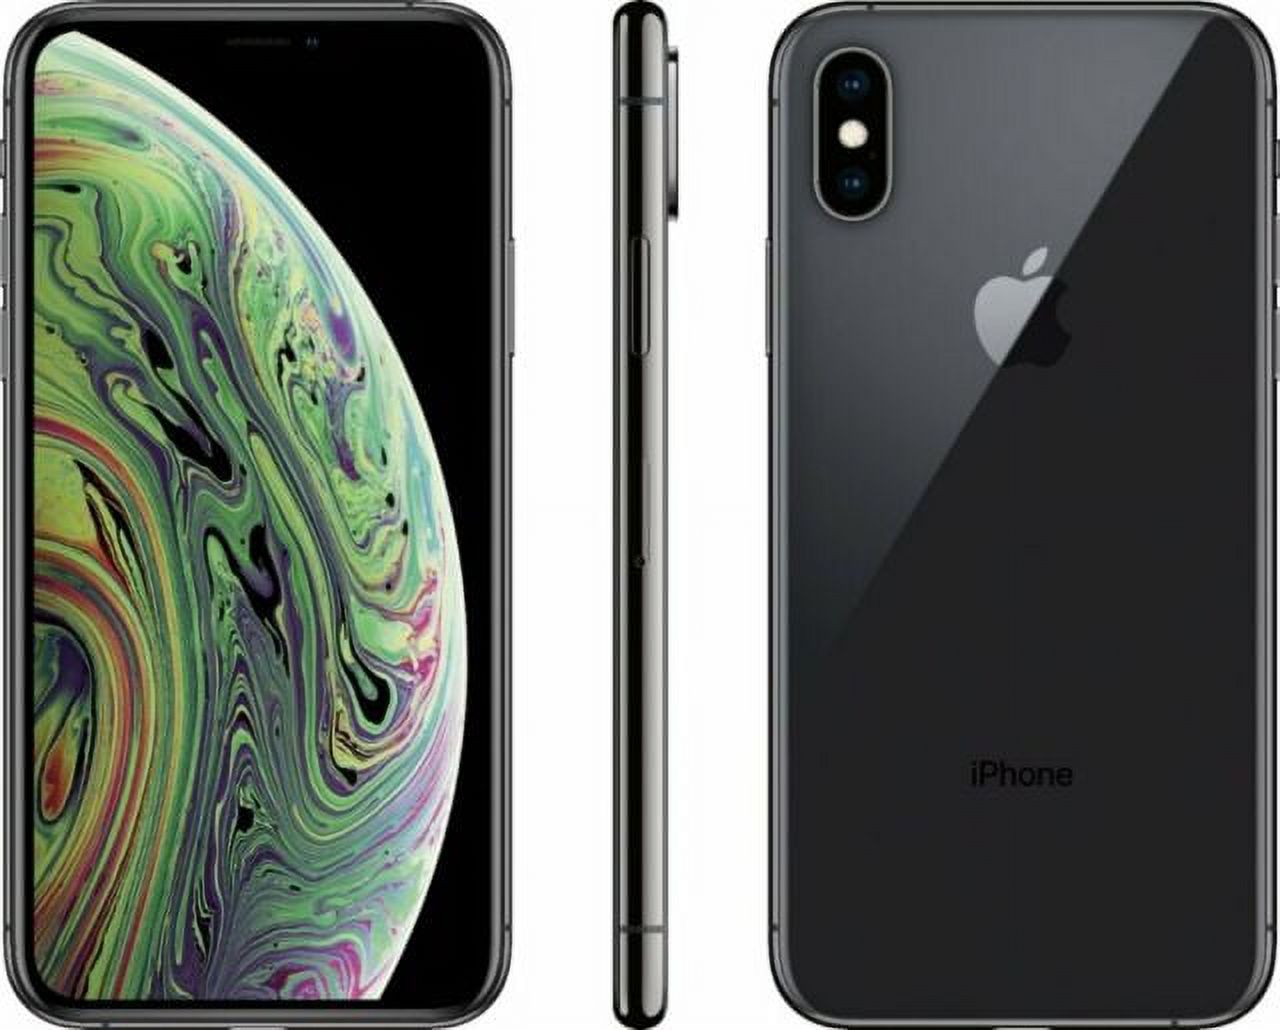 Pre-Owned Apple iPhone XS Max Fully Unlocked, Space Gray 256gb (Refurbished: Fair) - image 2 of 5